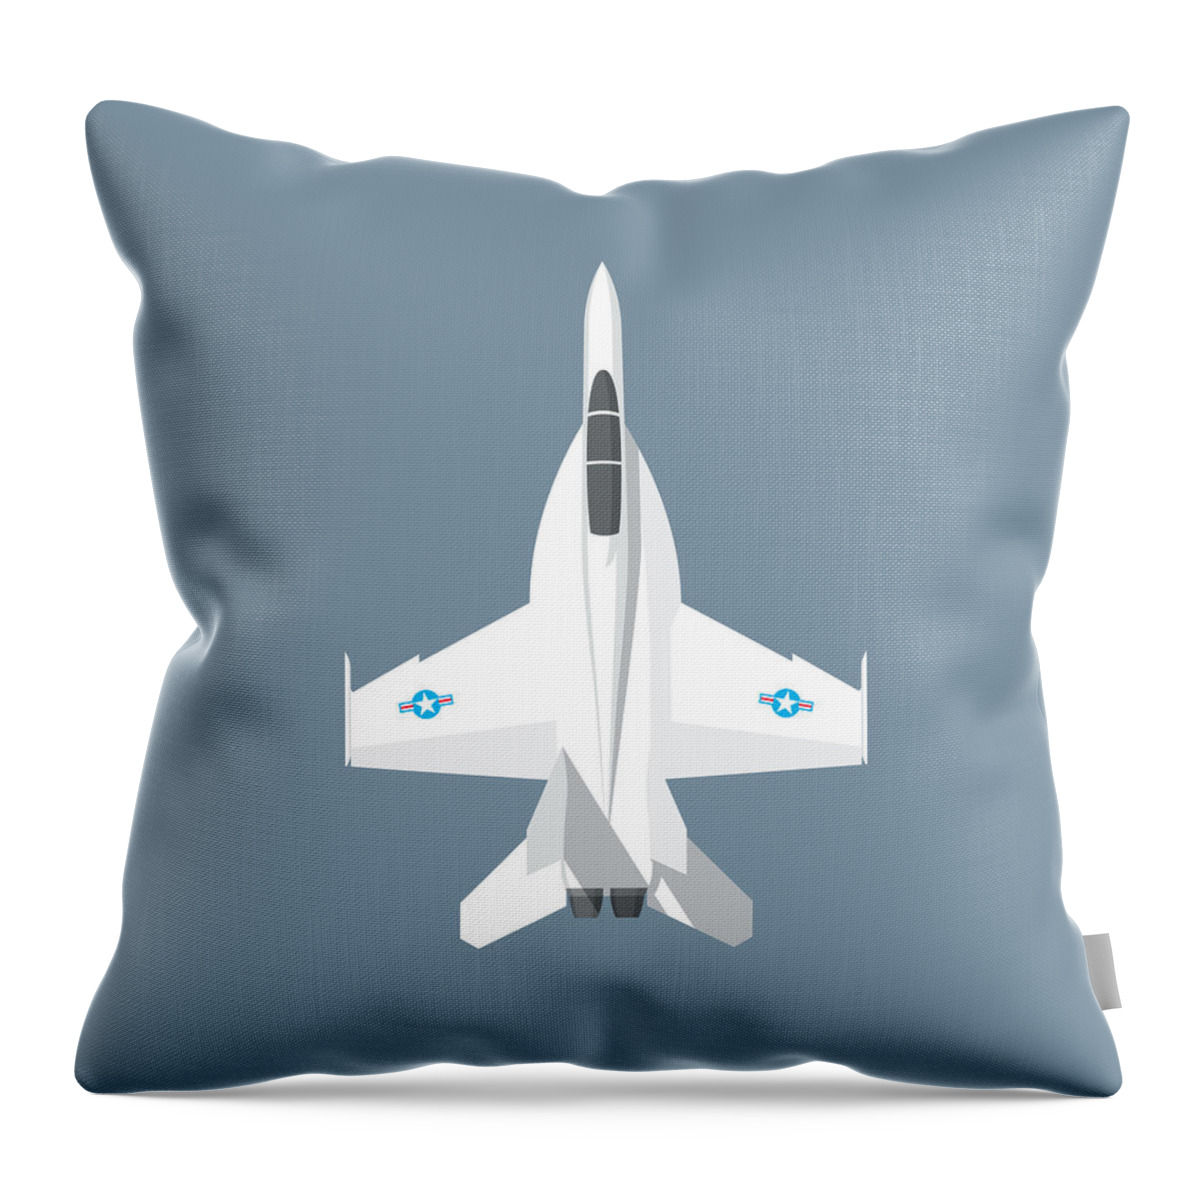 Jet Throw Pillow featuring the digital art F-18 Super Hornet Jet Fighter Aircraft - Slate by Organic Synthesis